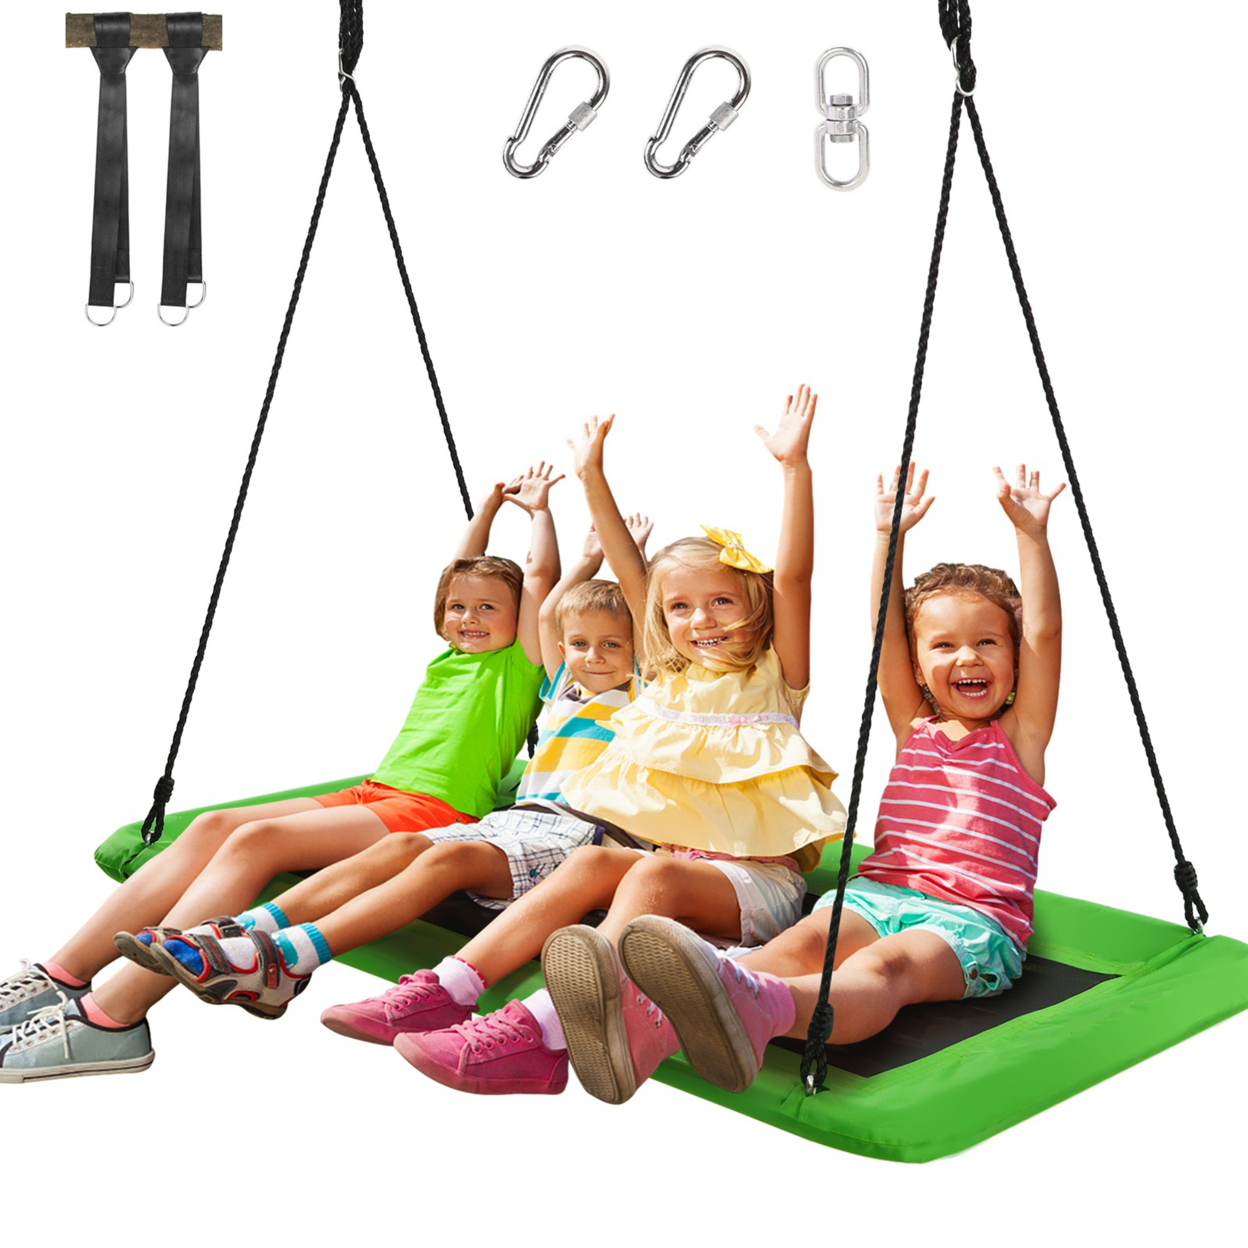 60'' Kids Giant Tree Rectangle Swing 700 Lbs W/ Adjustable Hanging Ropes - Green